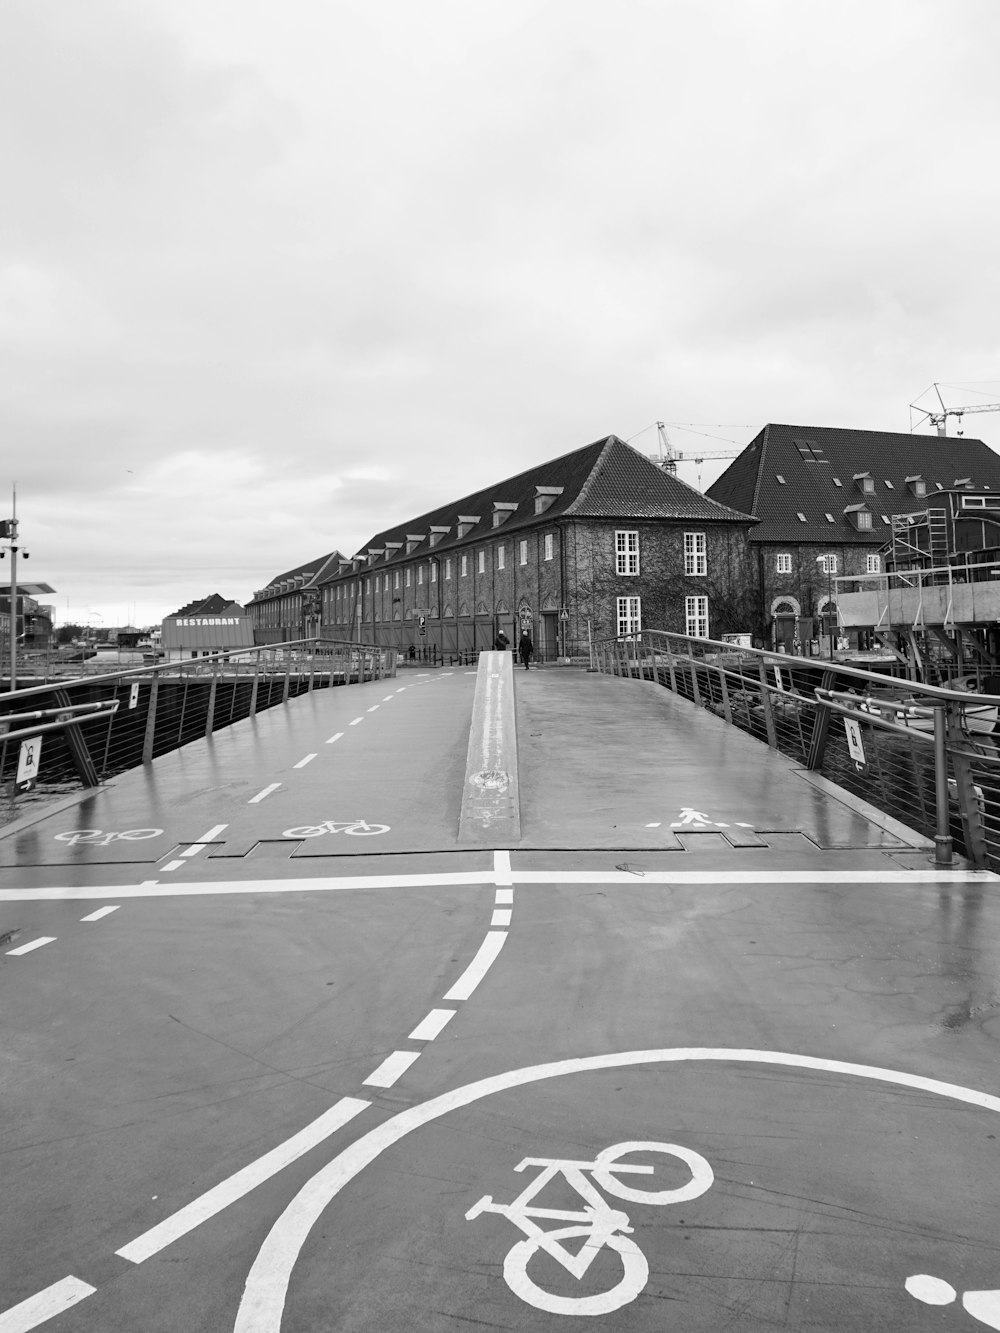 a bicycle lane on a bridge with buildings in the background